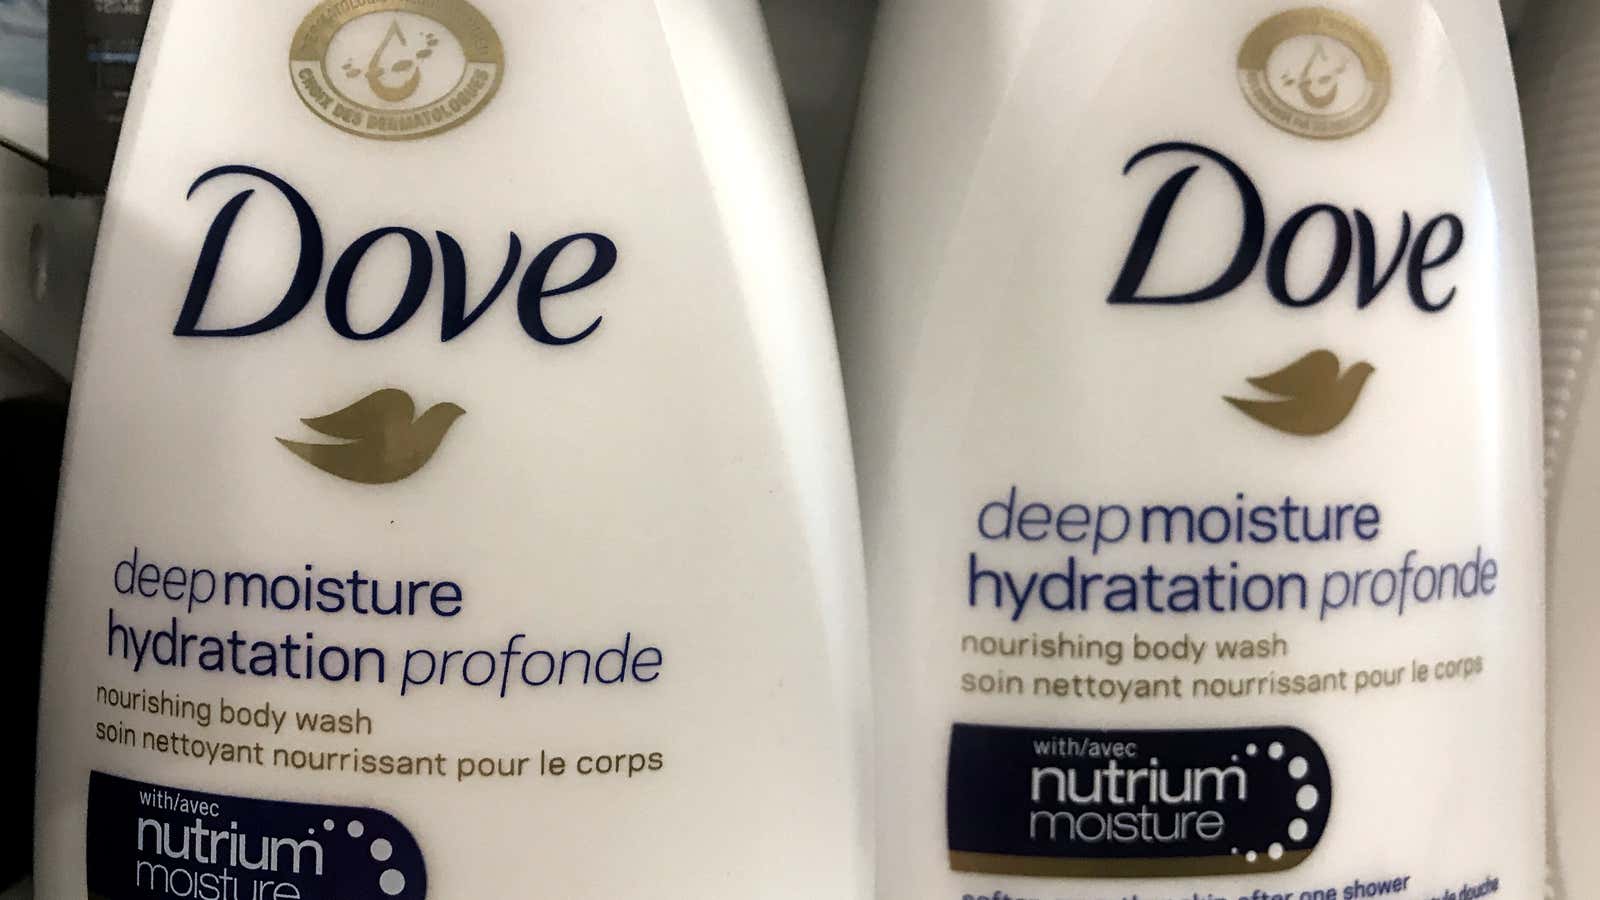 Dove is facing a boycott of its products.